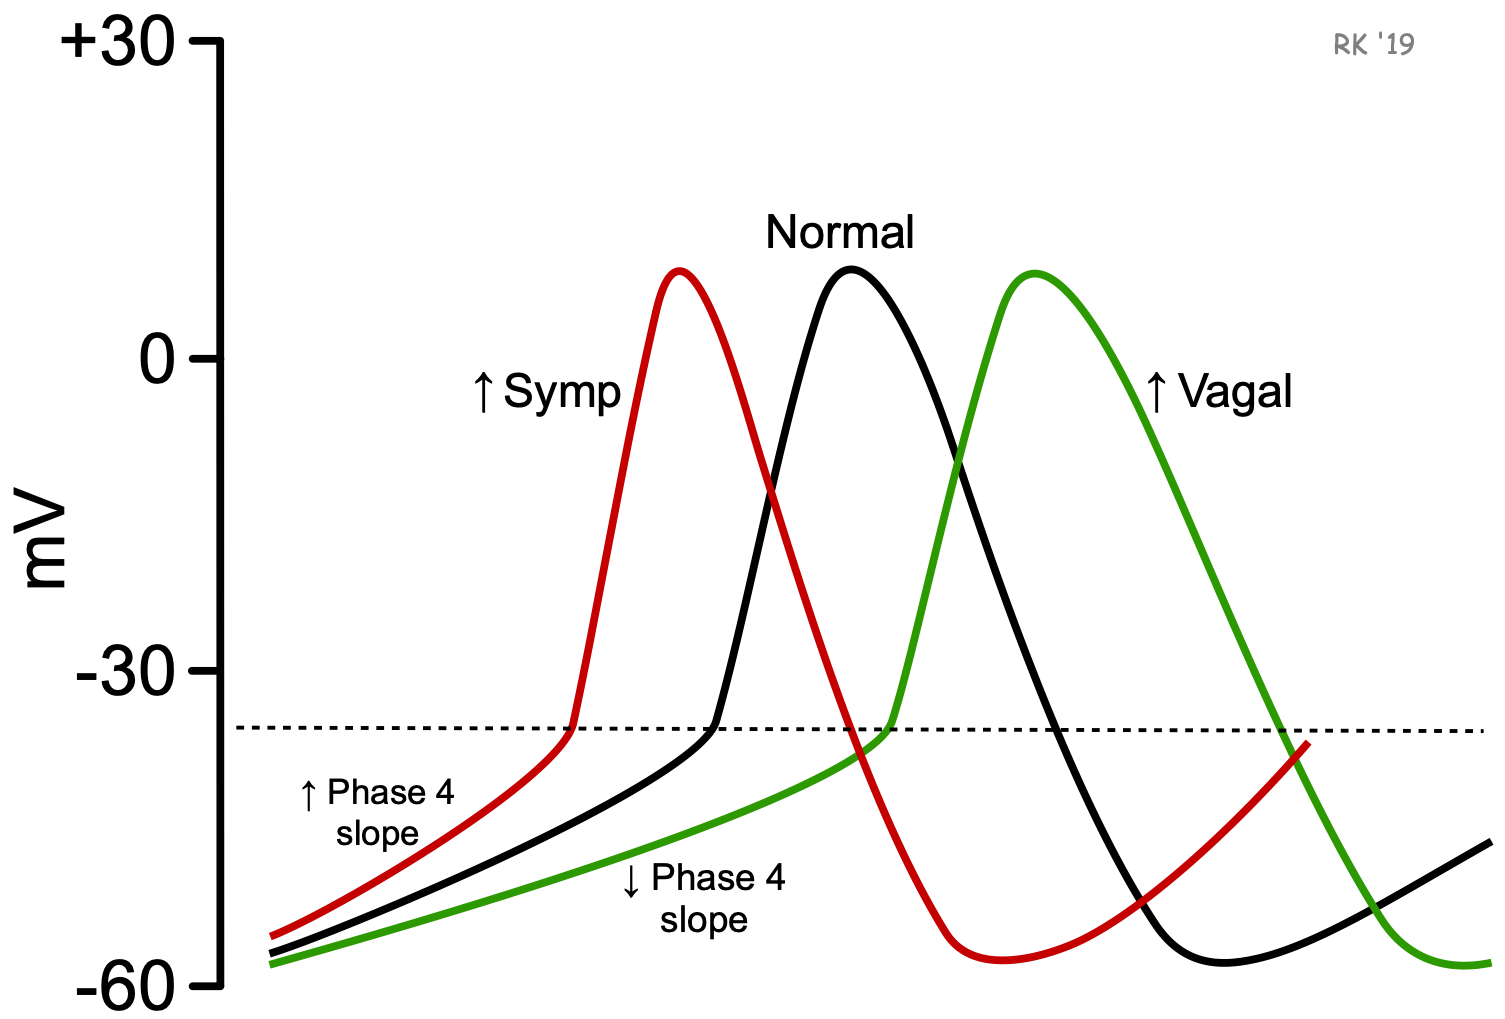 Diagram explaining the influence of the Sympathetic and Parasympathetic Nervous System on the action potential profile of a nodal cell. The opposing effects of the sympathetic (red) and parasympathetic (green) nervous system on the action potential of a nodal cell. With an increase in sympathetic nervous system stimulation, the membrane potential reaches the threshold at a much quicker pace; therefore, the action potential profile becomes more rapid. However, with increased parasympathetic nervous system activity reflected through stimulation of the vagus nerve, the membrane takes much longer to reach the threshold. As a result, the action potential profile is lengthened.